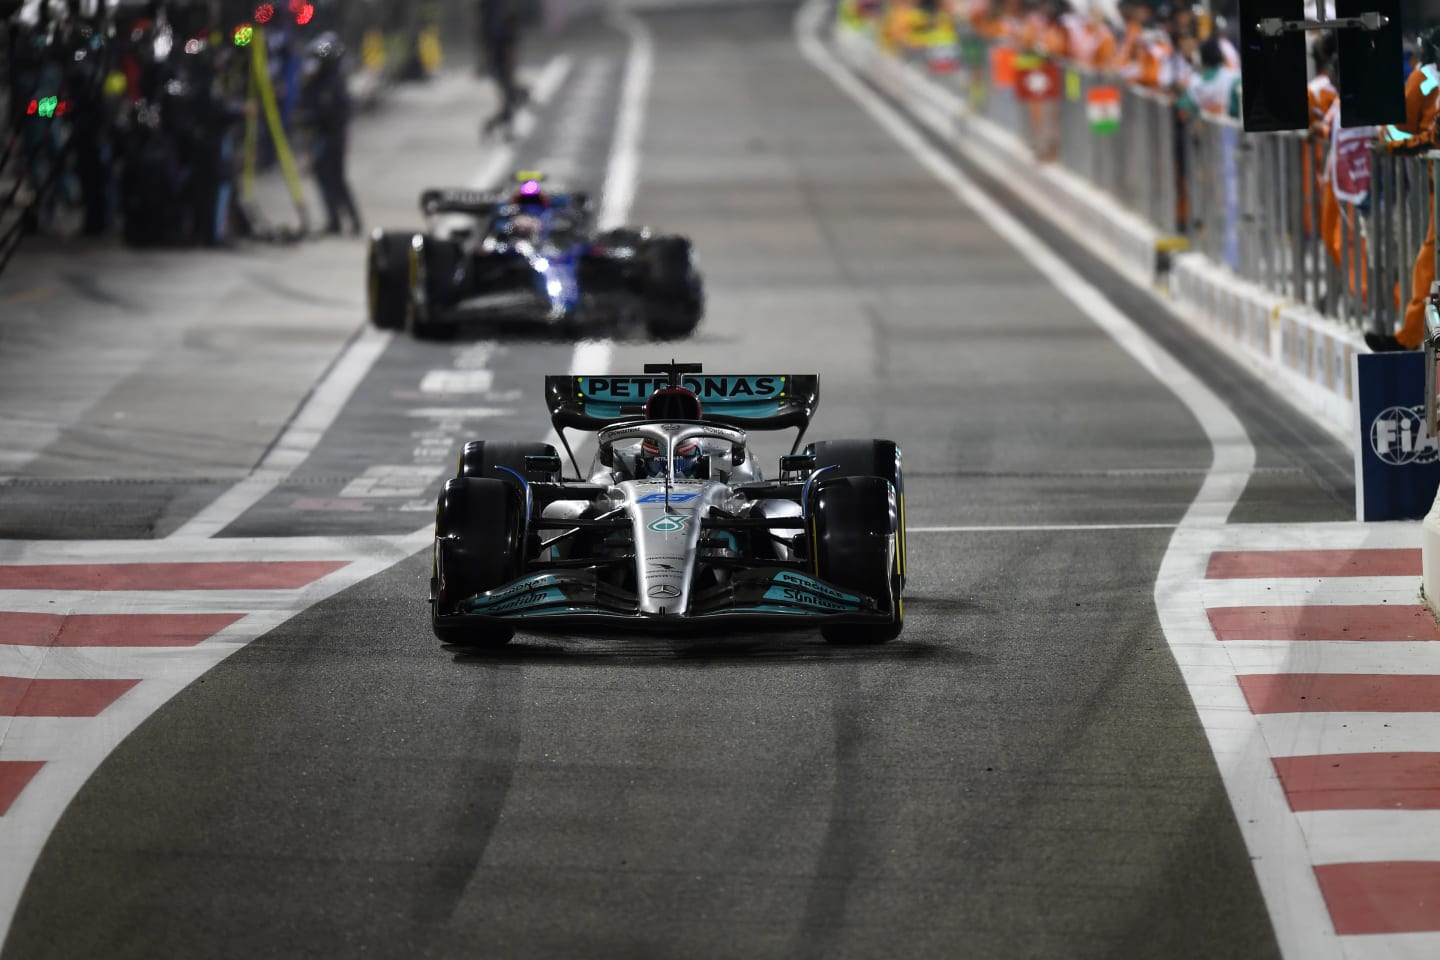 ABU DHABI, UNITED ARAB EMIRATES - NOVEMBER 20: George Russell of Great Britain driving the (63) Mercedes AMG Petronas F1 Team W13 in the pitlane during the F1 Grand Prix of Abu Dhabi at Yas Marina Circuit on November 20, 2022 in Abu Dhabi, United Arab Emirates. (Photo by Rudy Carezzevoli/Getty Images)